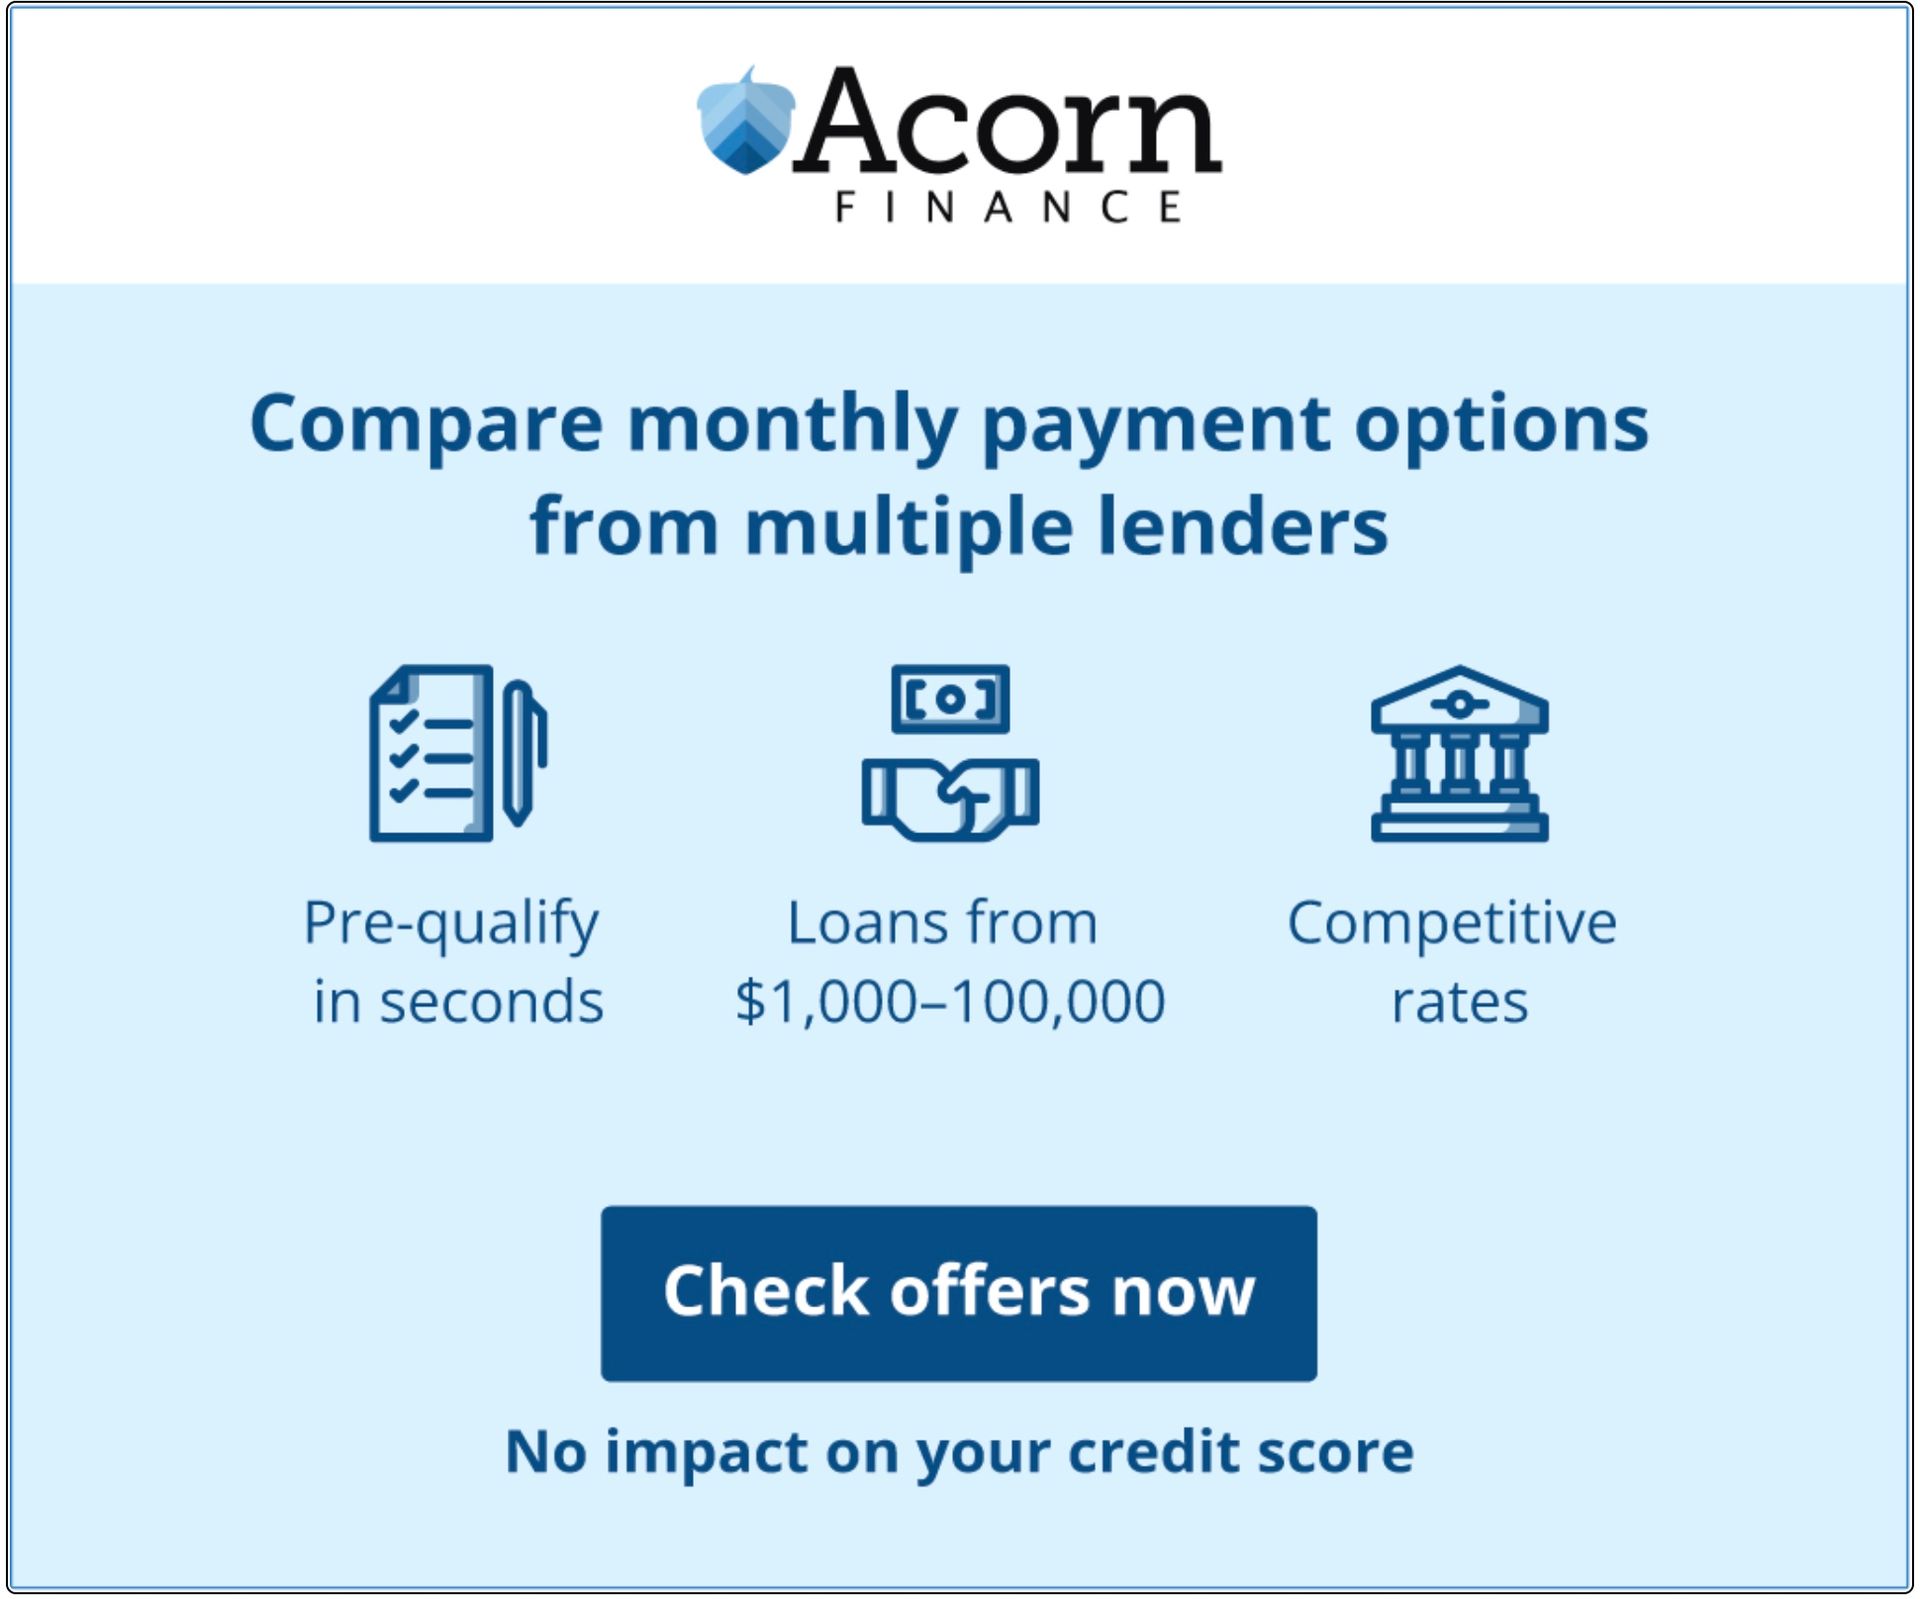 acorn finance offers monthly payment options from multiple lenders